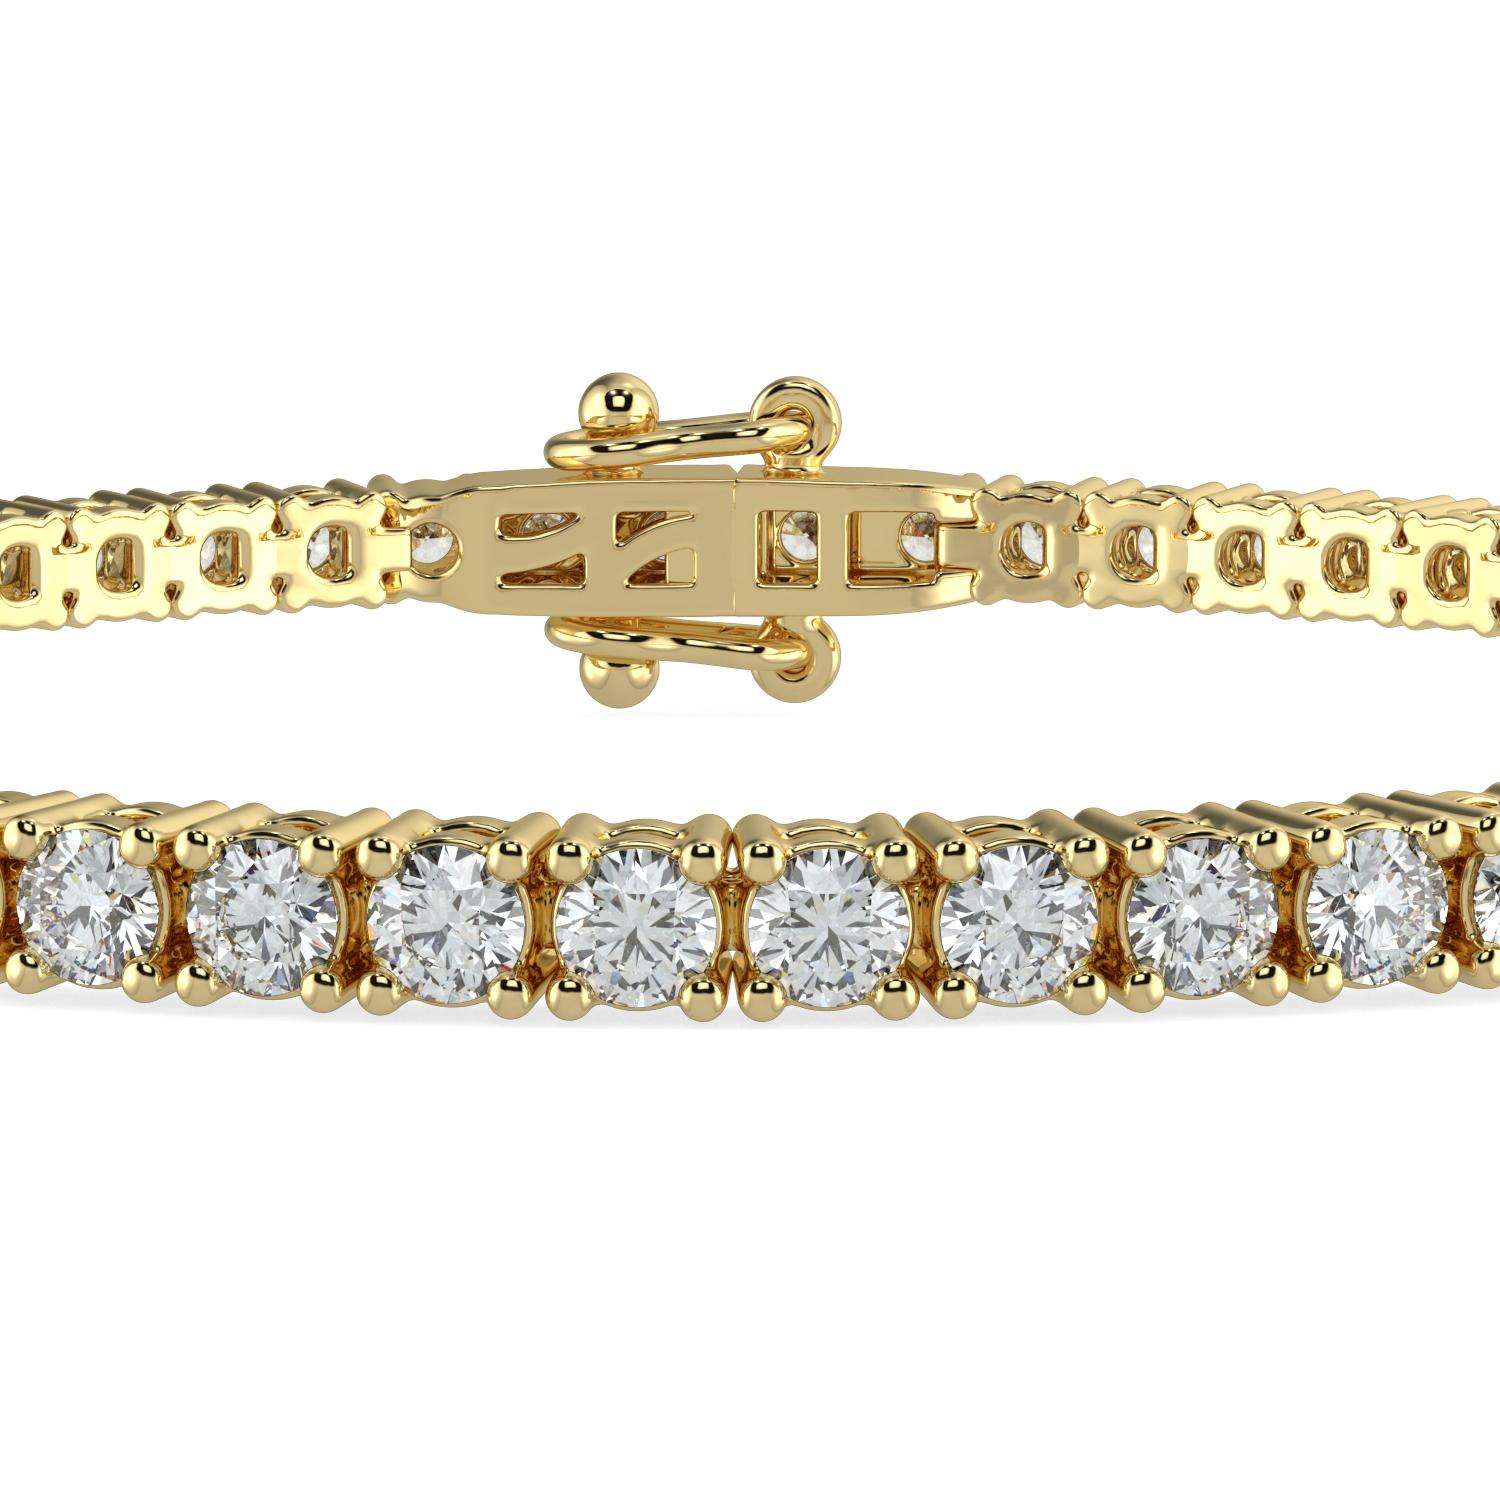 12.00 Carat Round Cut GH-I1 Natural Diamond Classic Tennis Bracelet 4 Prong 14K Yellow Gold for Women

Specification
Brand: AAMIAA
Length: 7 Inches 
Color: GH
Carat Weight:12.00CTW
Clarity: I1

LUXURIOUS AND LASTING- Our bracelets are a luxurious